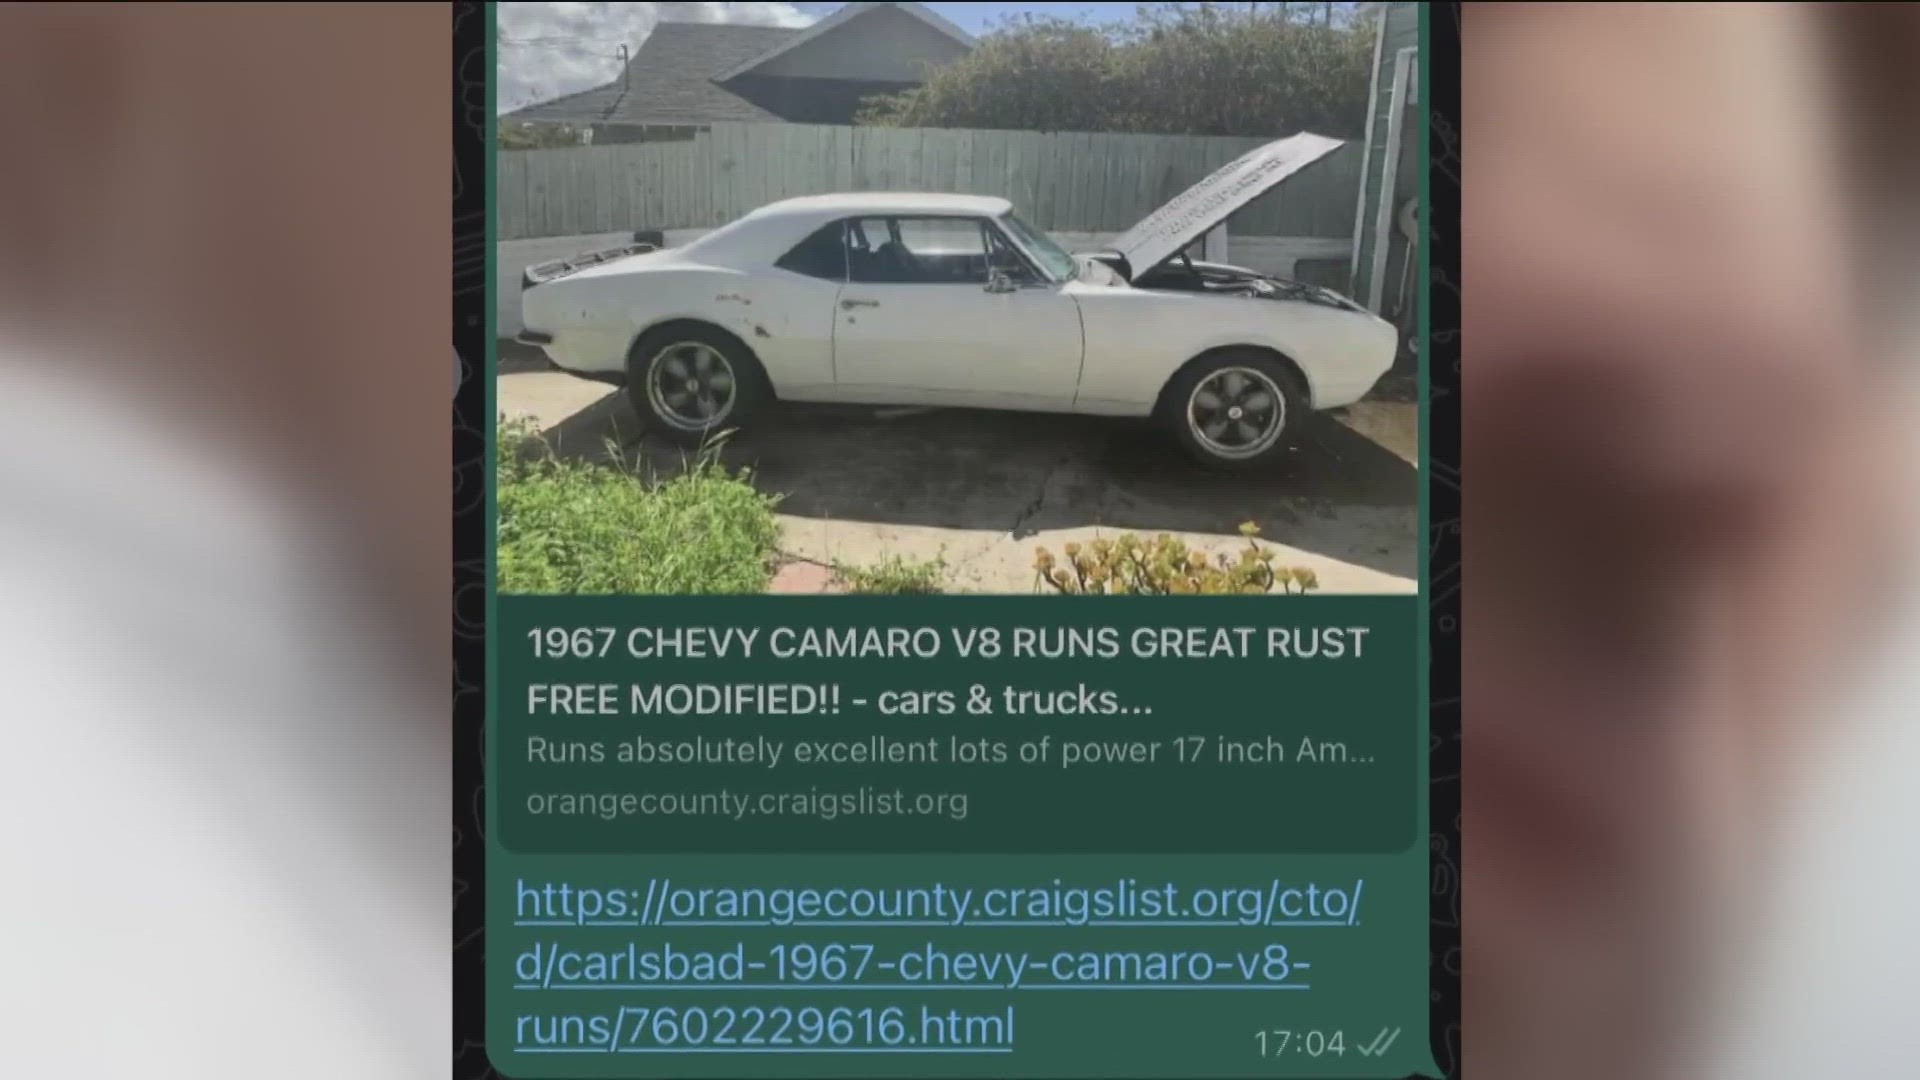 The Craigslist ad for Howard Reitzes’ 1967 Camaro is listed for $14,000, but Howard didn’t post it. Another man Howard met posted it, and it was a scam.